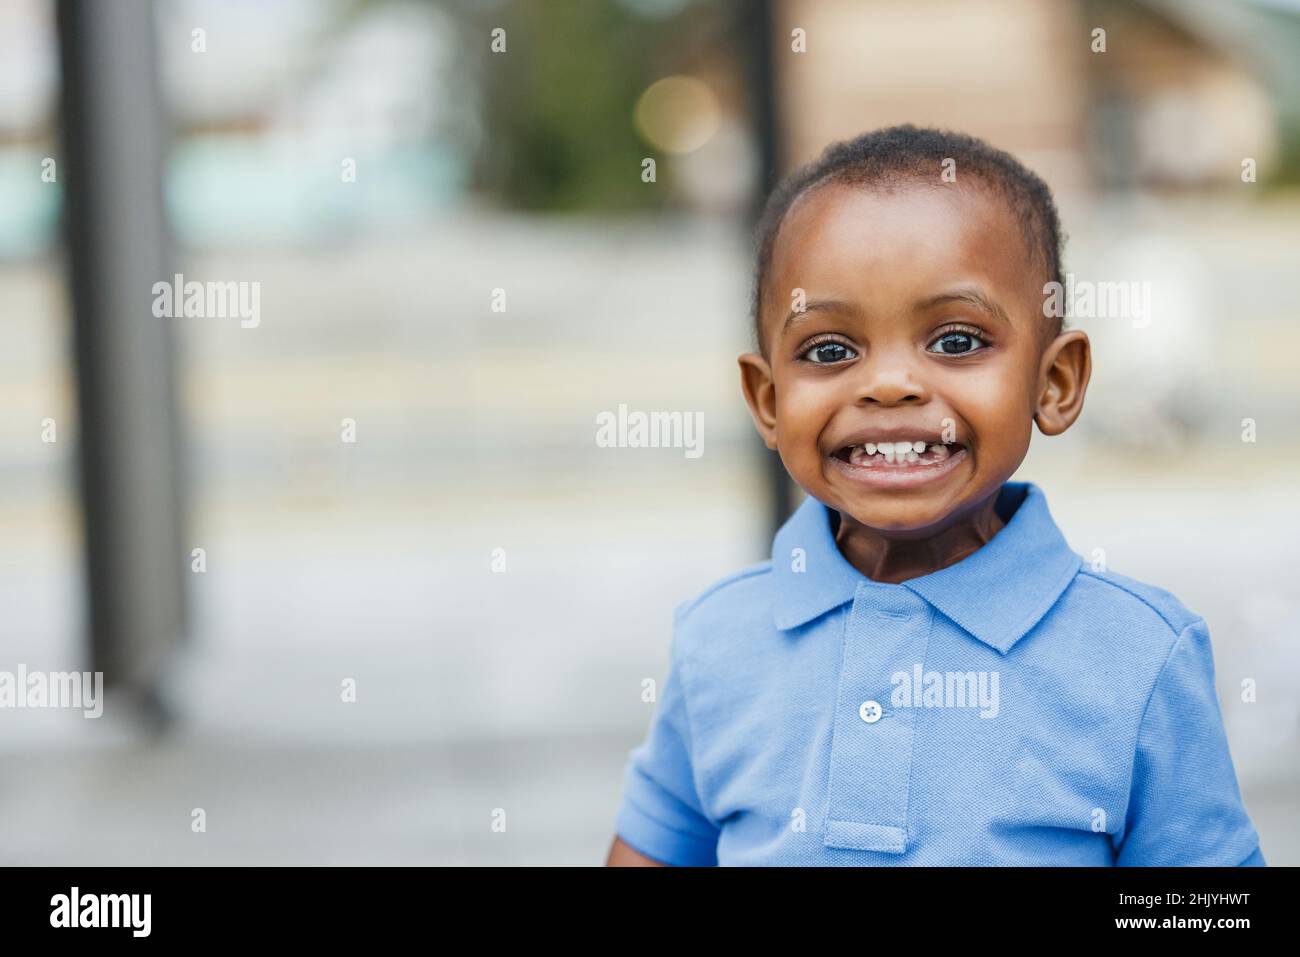 A cute one year old toddler almost preschool age African-American boy with big eyes smiling and looking away with copy space Stock Photo